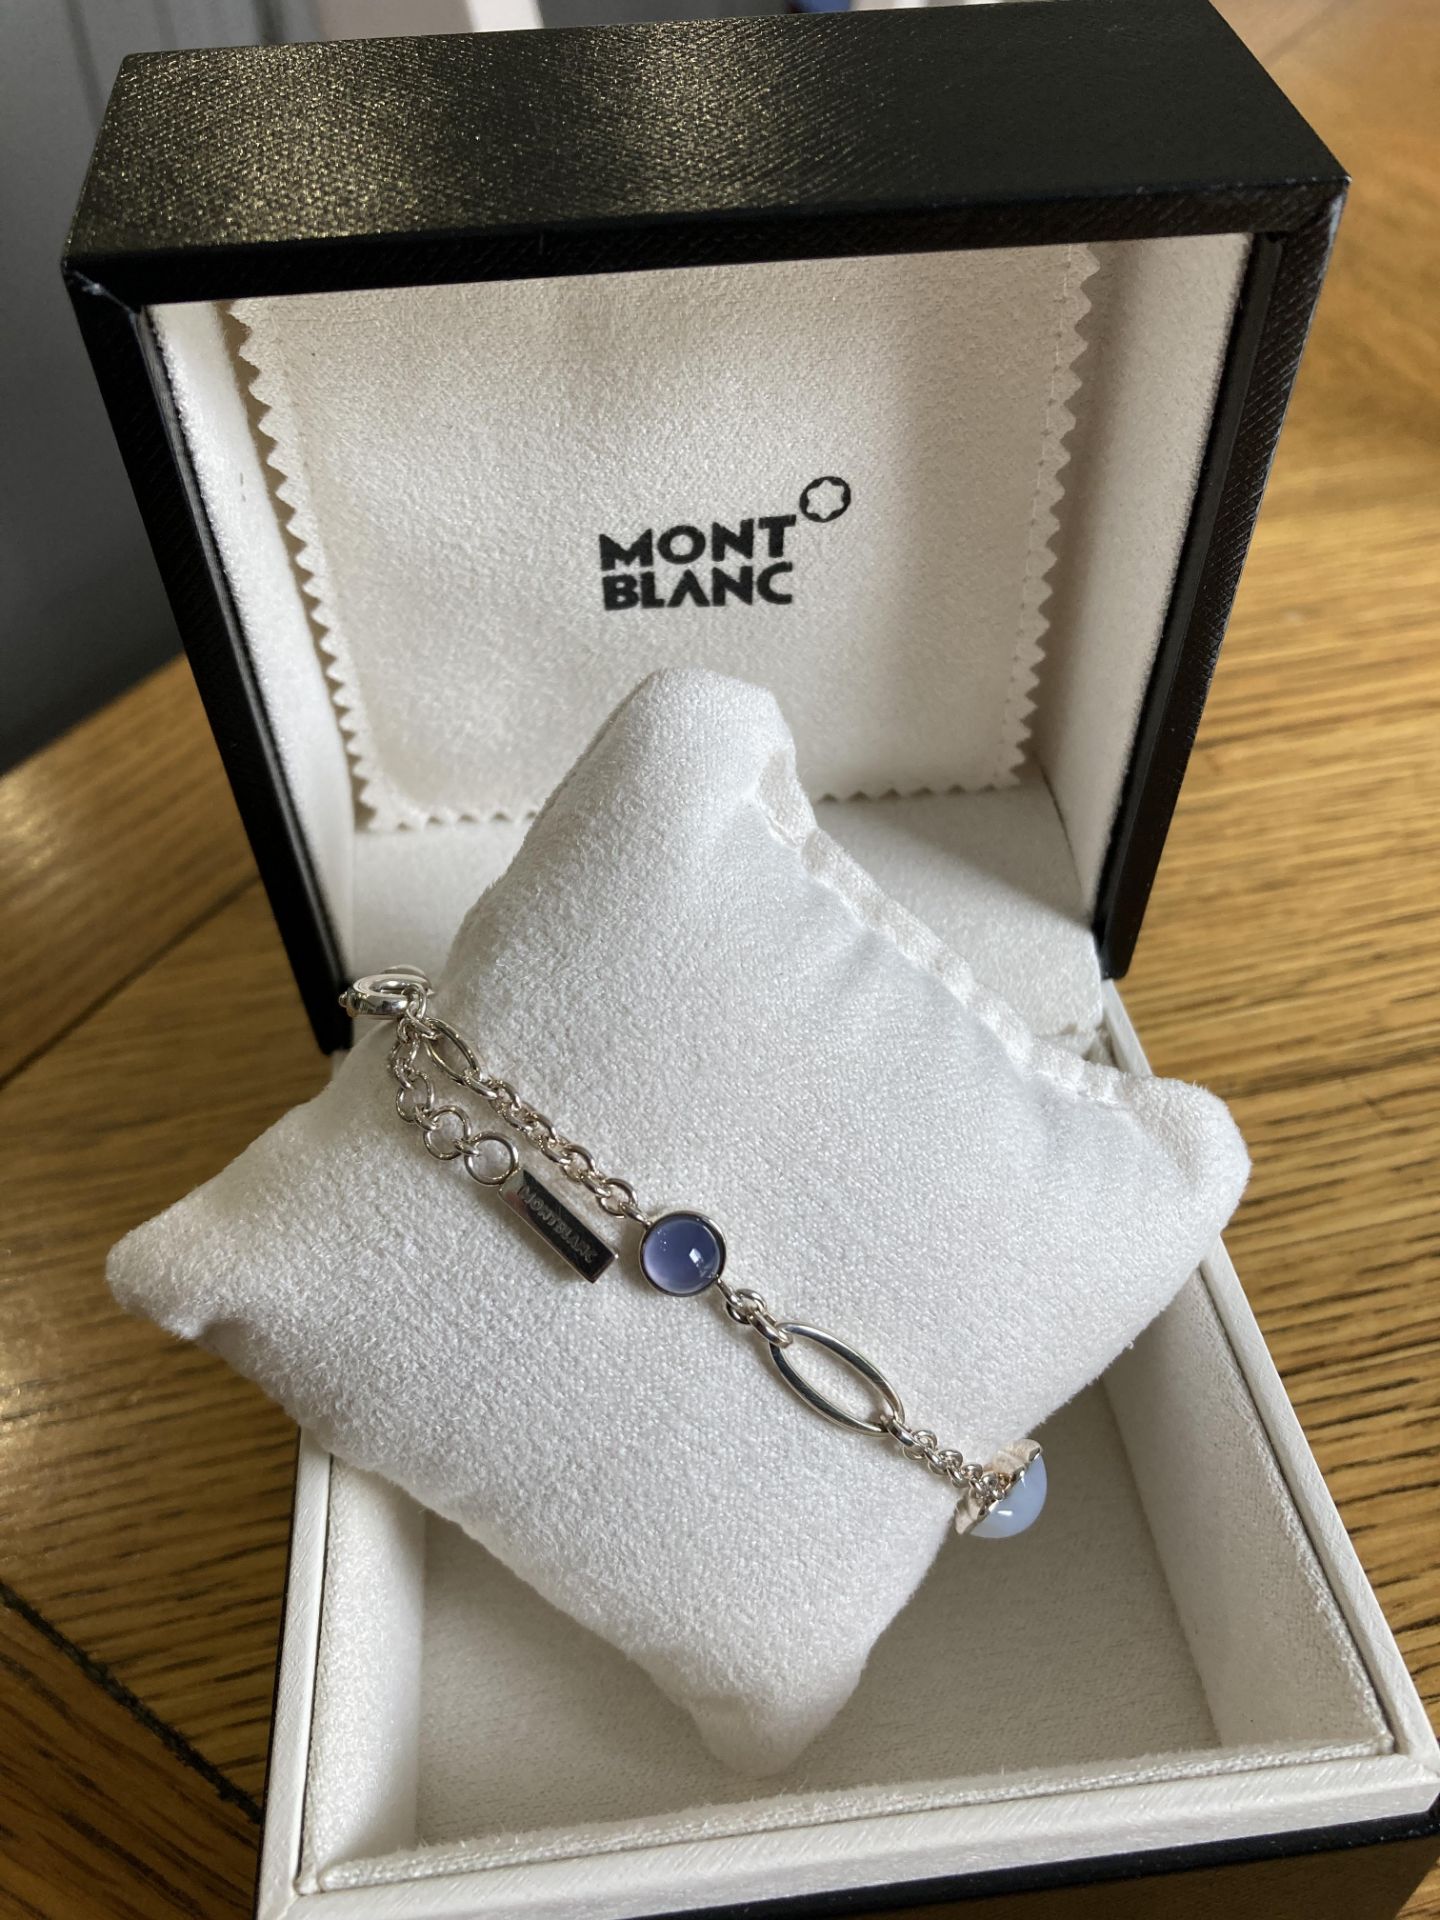 MONT BLANC STERLING SILVER 925 BRACELET WITH CABOCHONS (BOXED) - Image 2 of 7